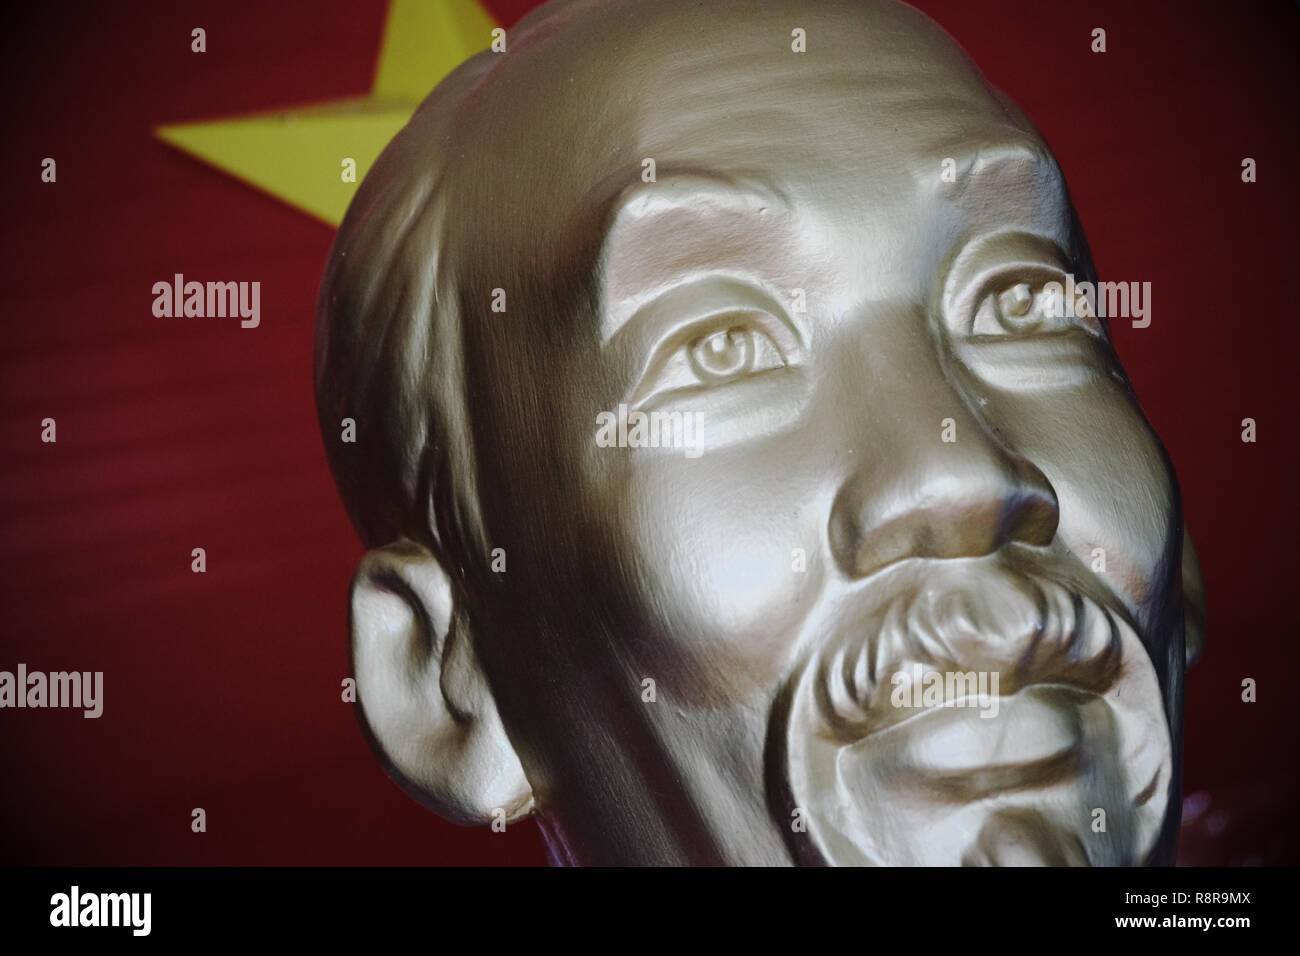 Vietnam statue of leader Ho Chi Minh with communist party flag behind Stock Photo